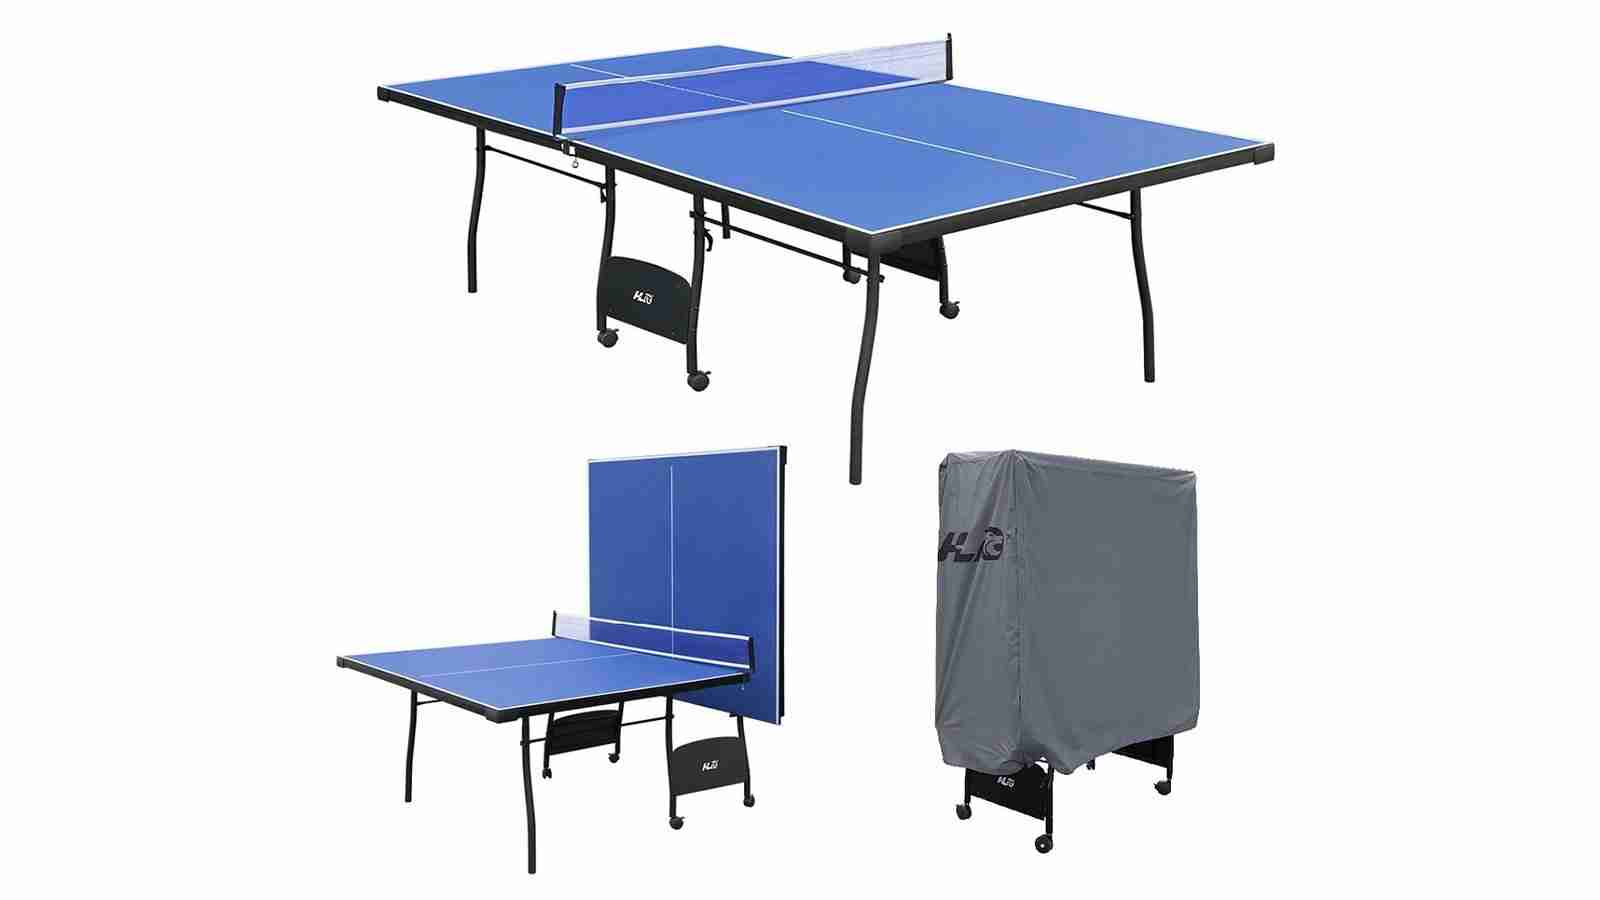 donnay table tennis table assembly instructions